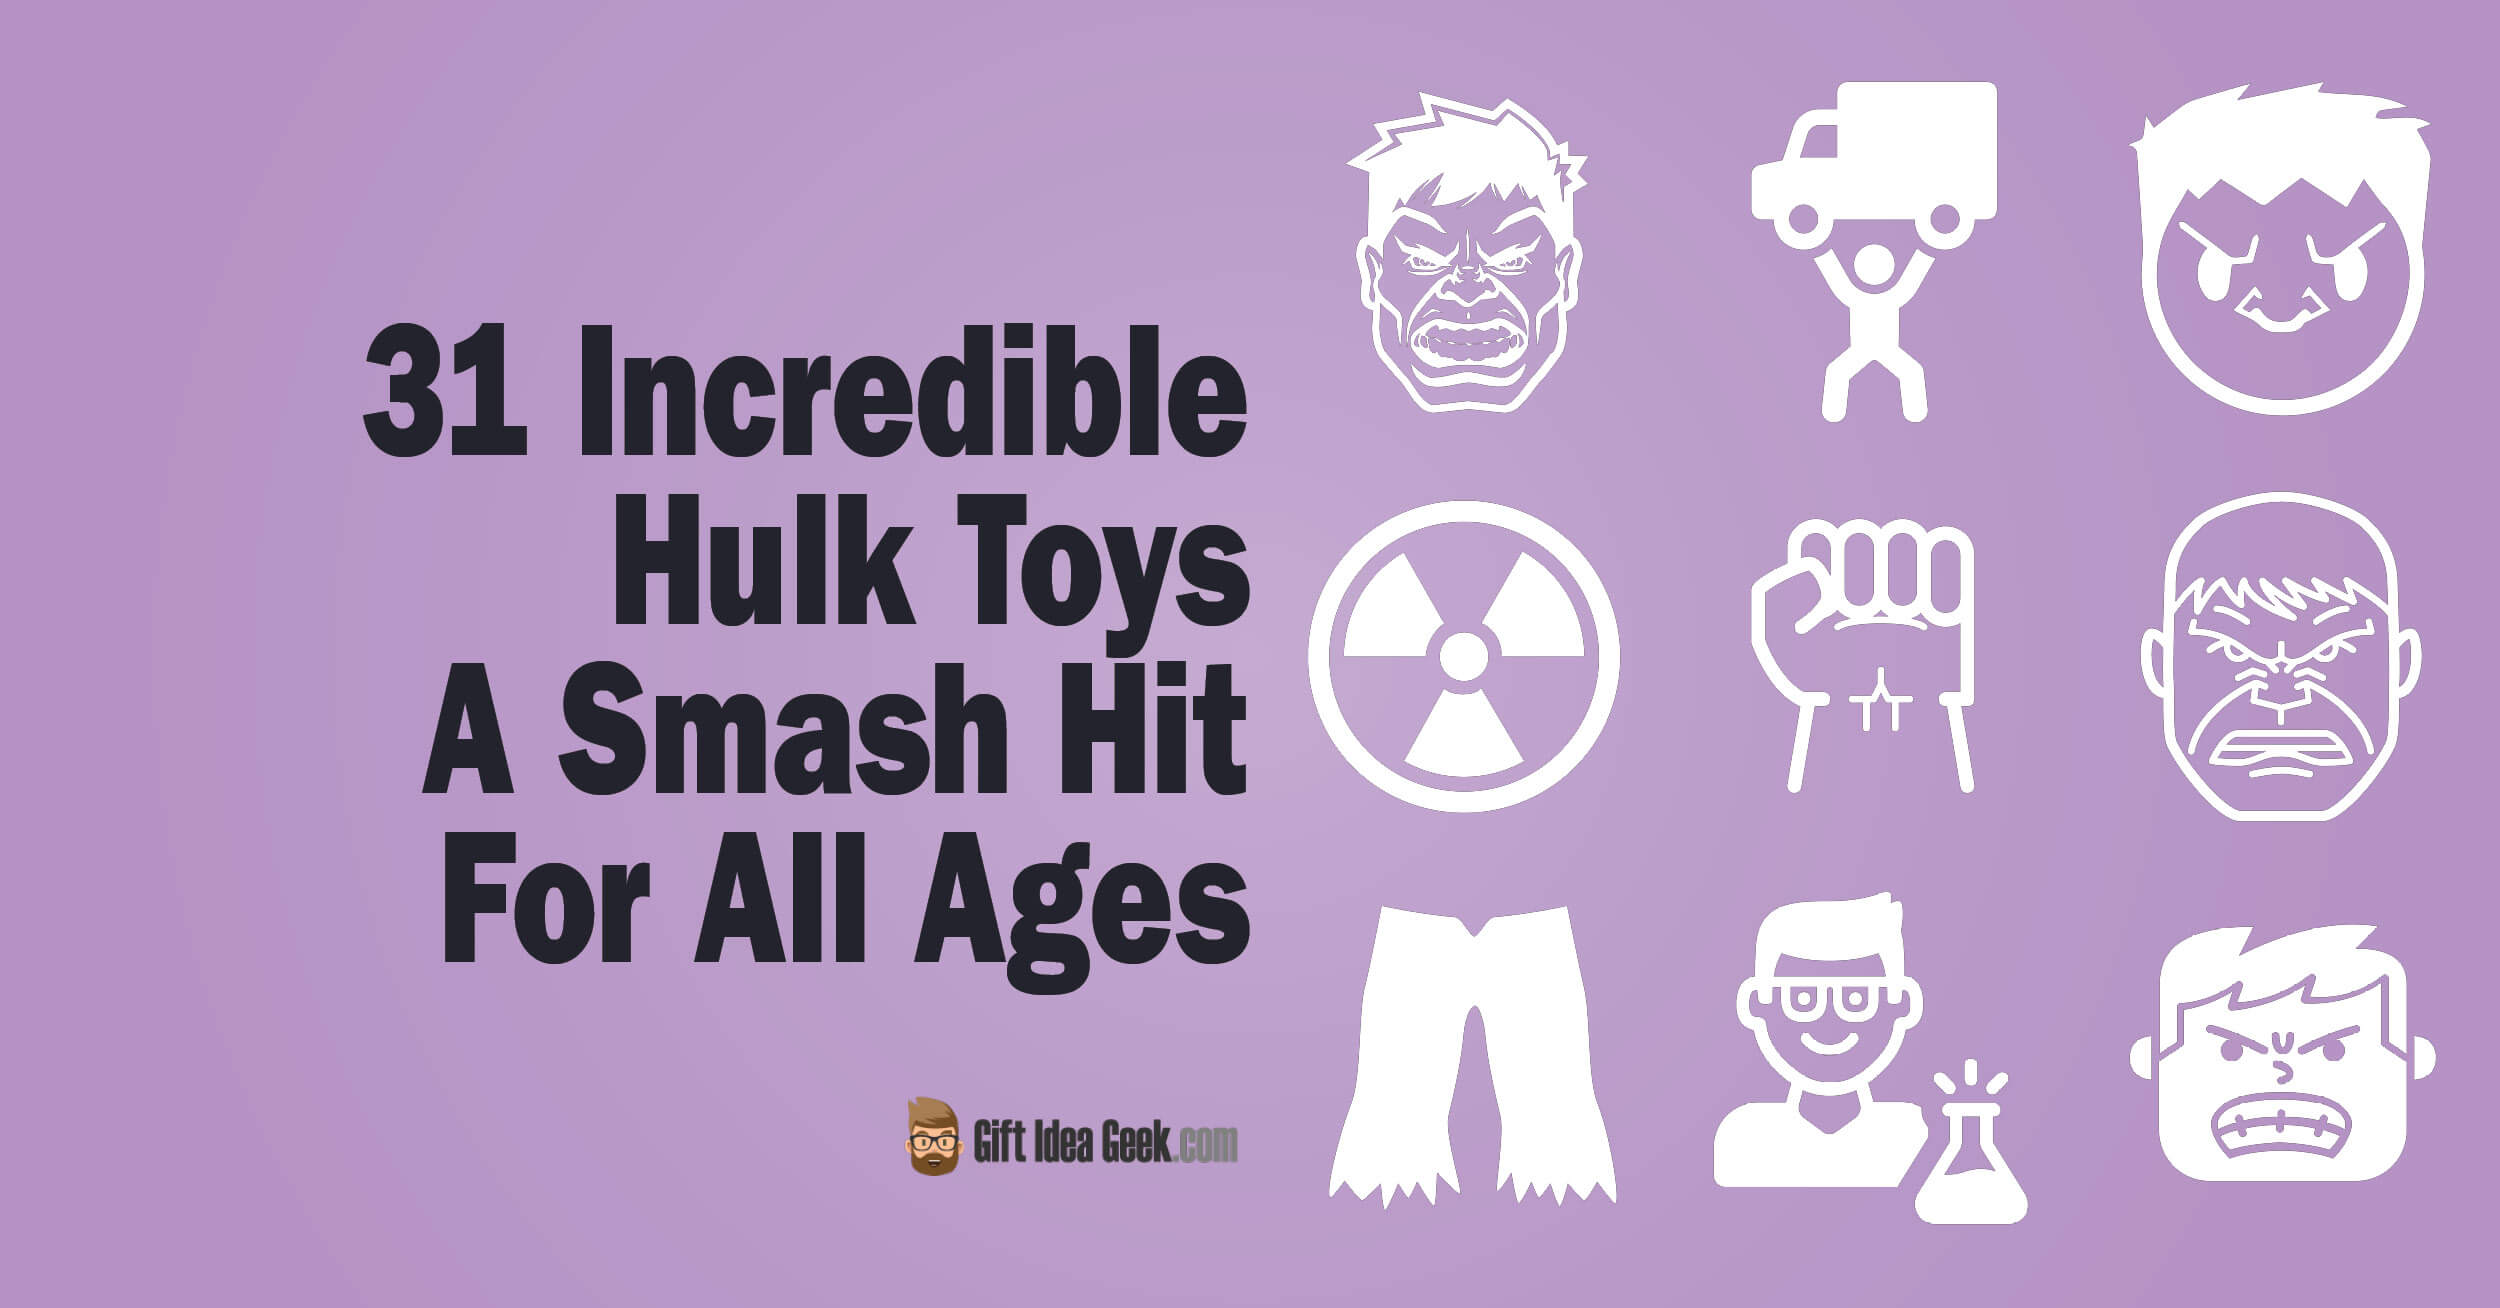 31 Incredible Hulk Toys A Smash Hit For All Ages